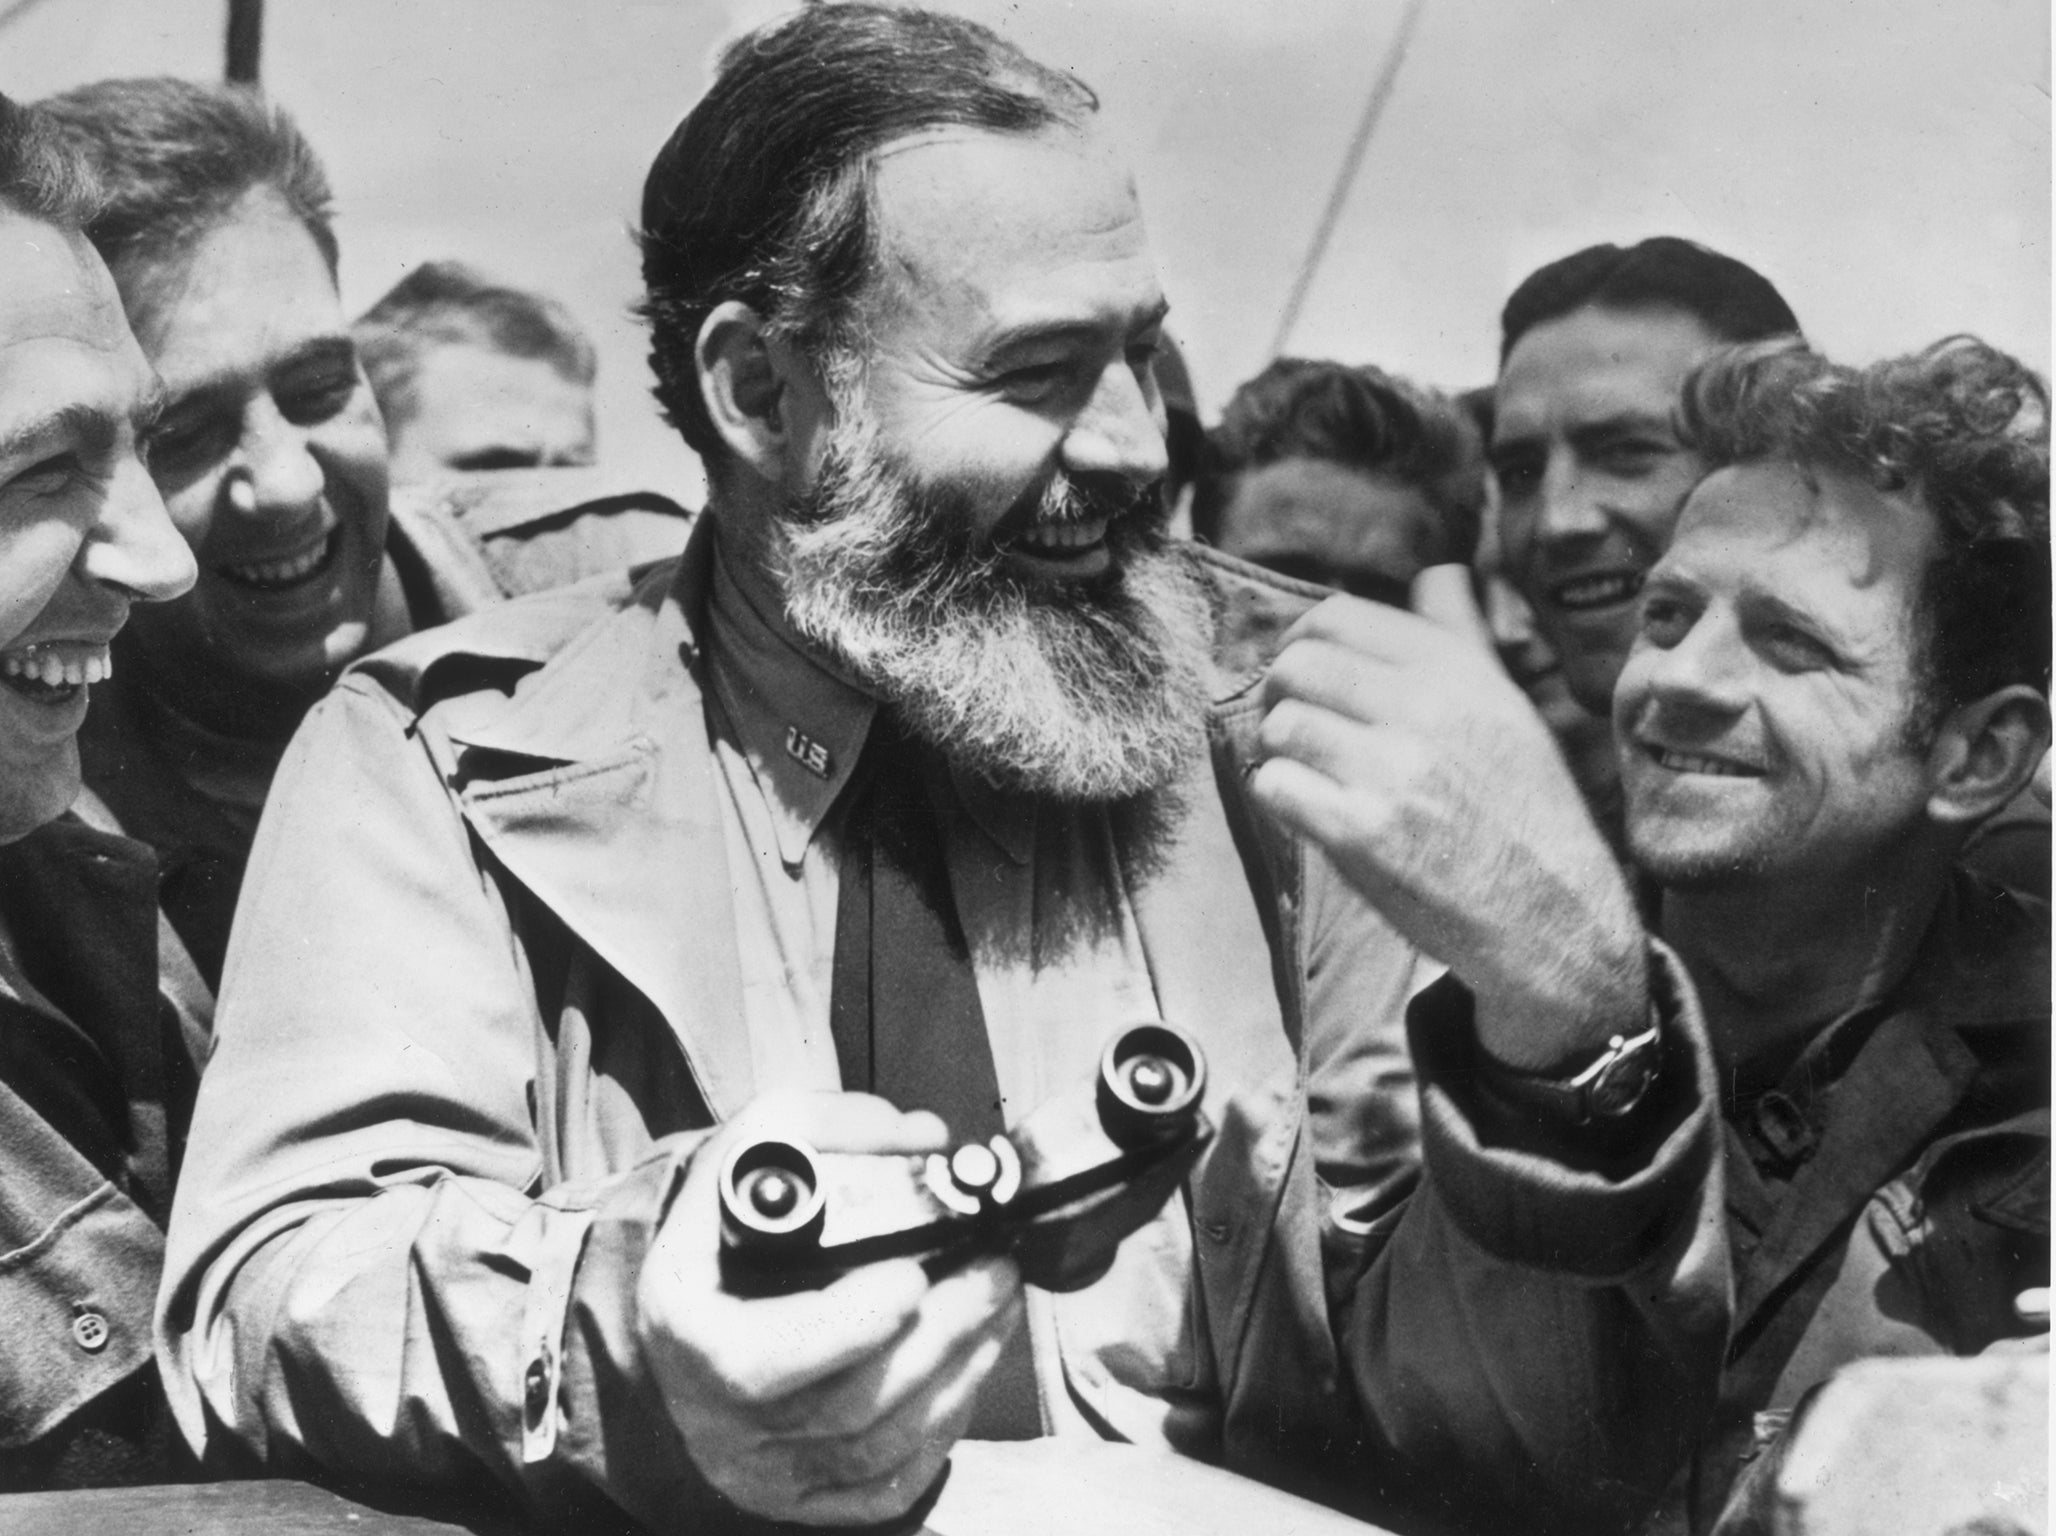 A young Hemingway was among those in attendance